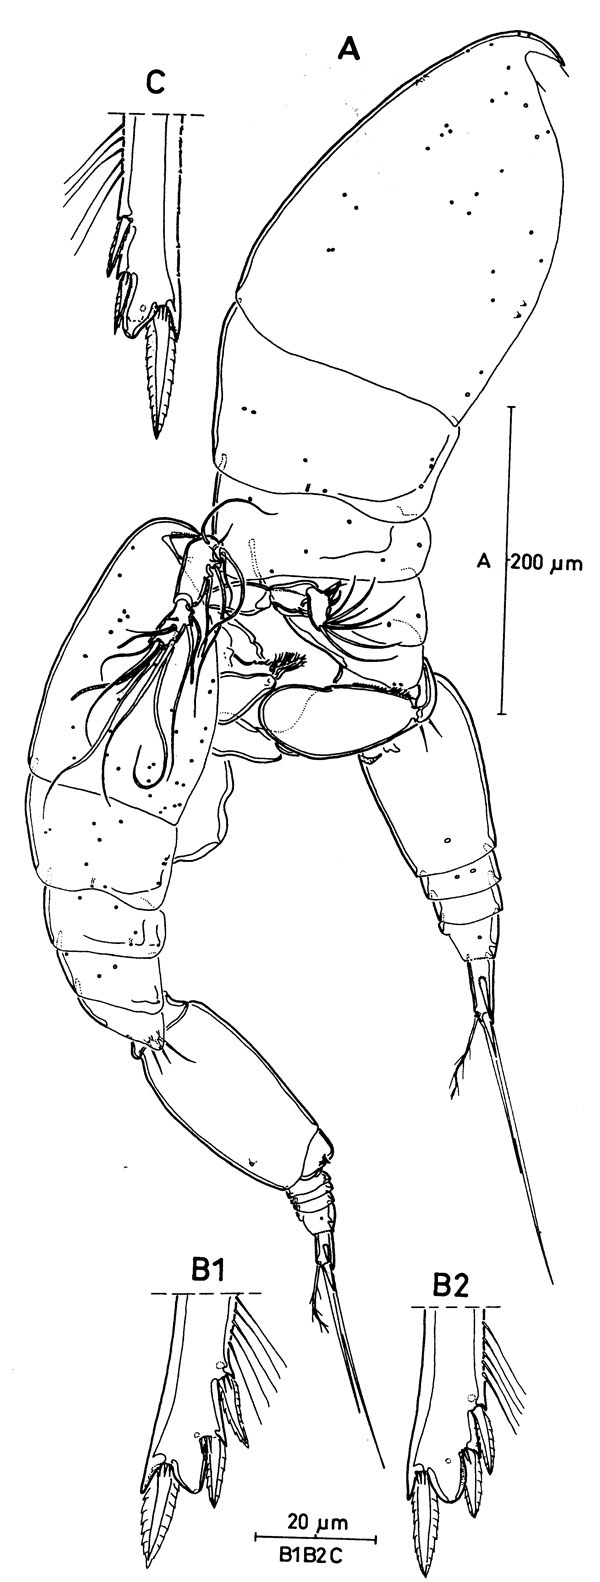 Species Oncaea clevei - Plate 2 of morphological figures